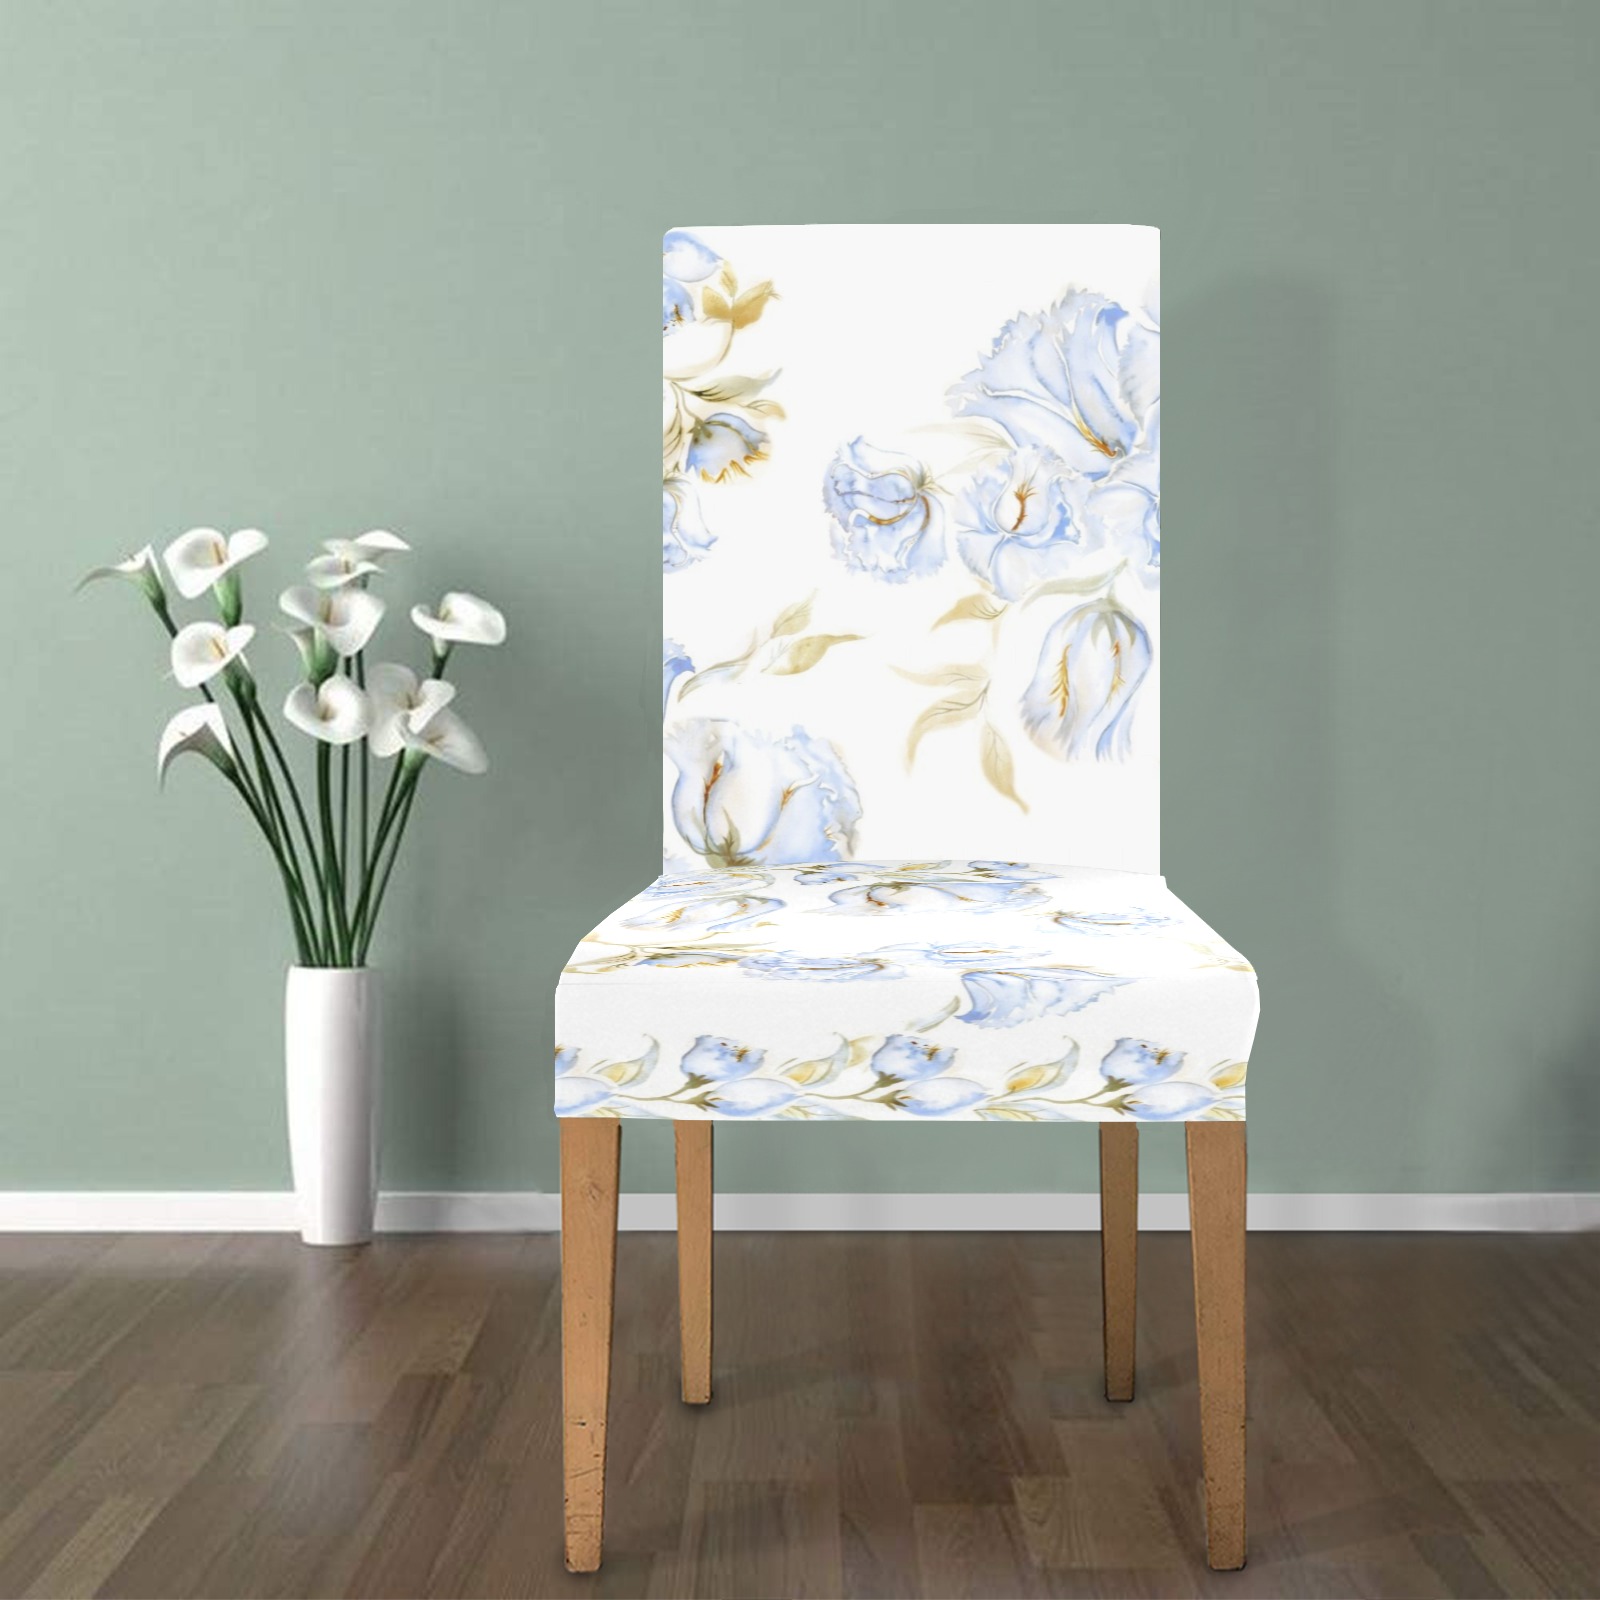 Chinese Peonies 5 Removable Dining Chair Cover